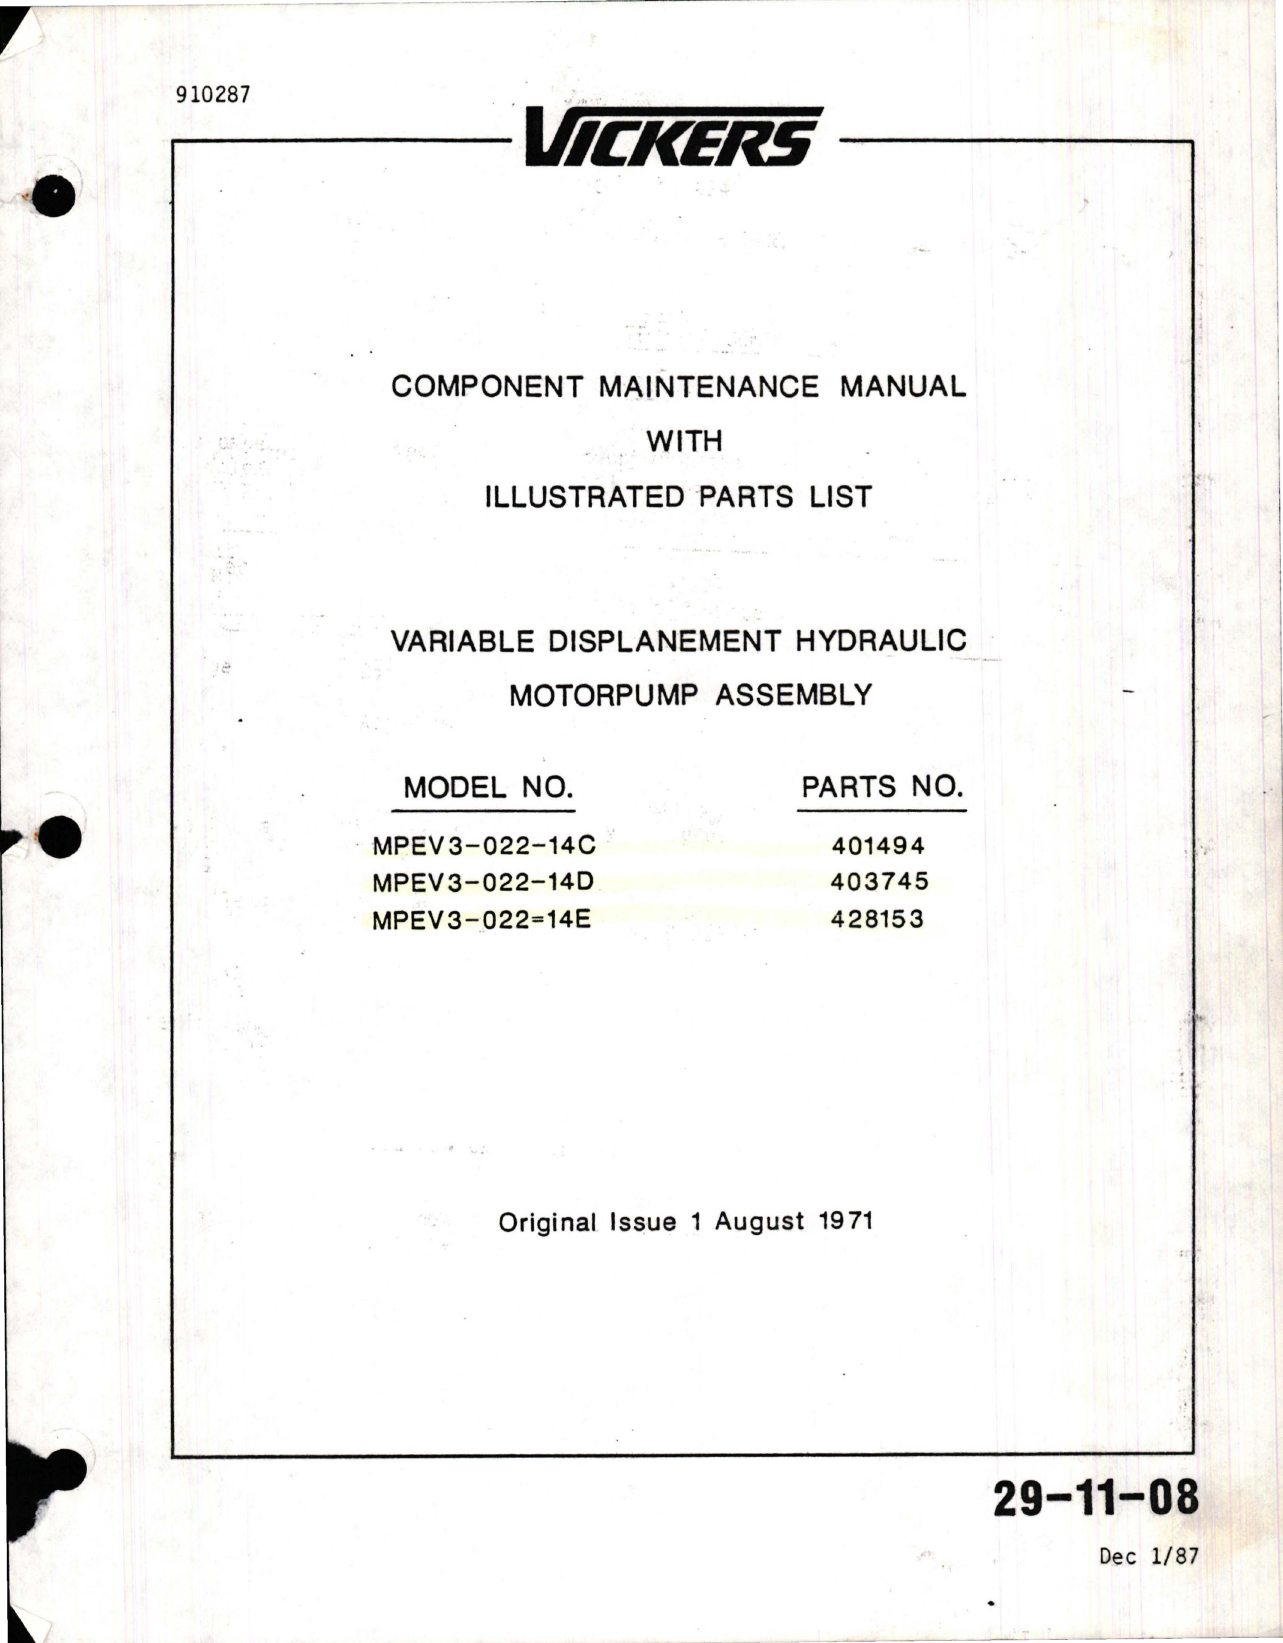 Sample page 1 from AirCorps Library document: Maintenance Manual with Illustrated Parts List for Variable Displacement Hydraulic Motorpump Assembly - Model MPEV3-022-14C, MPEV3-022-14D, and MPEV3-022-14E